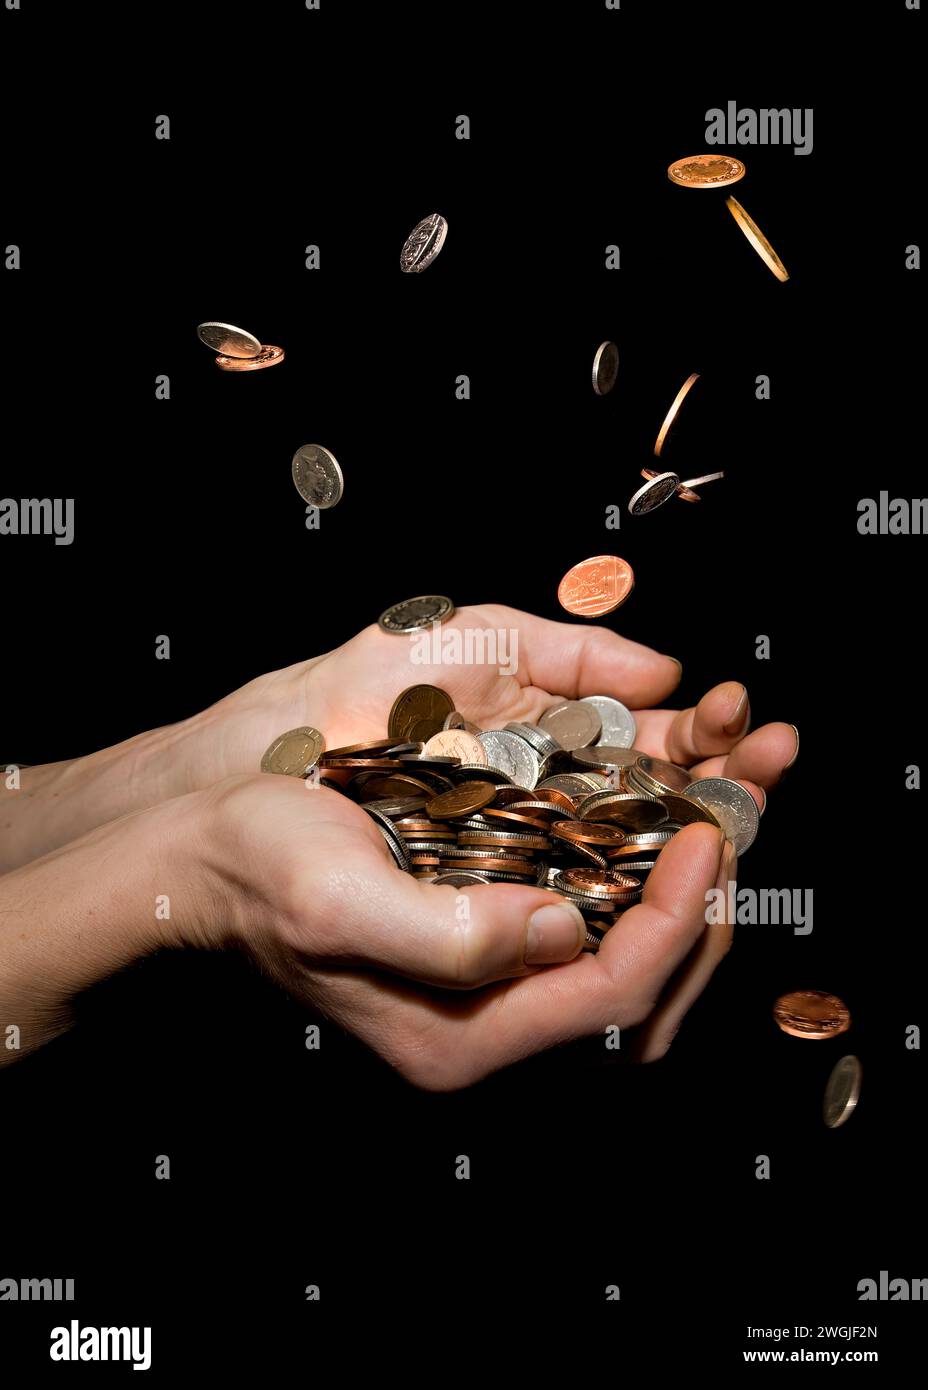 Caucasian male (42 yrs old) with hands held out trying to catch money, depicting the concept ‘its raining money’ or ‘money falling from the sky’ or 'p Stock Photo